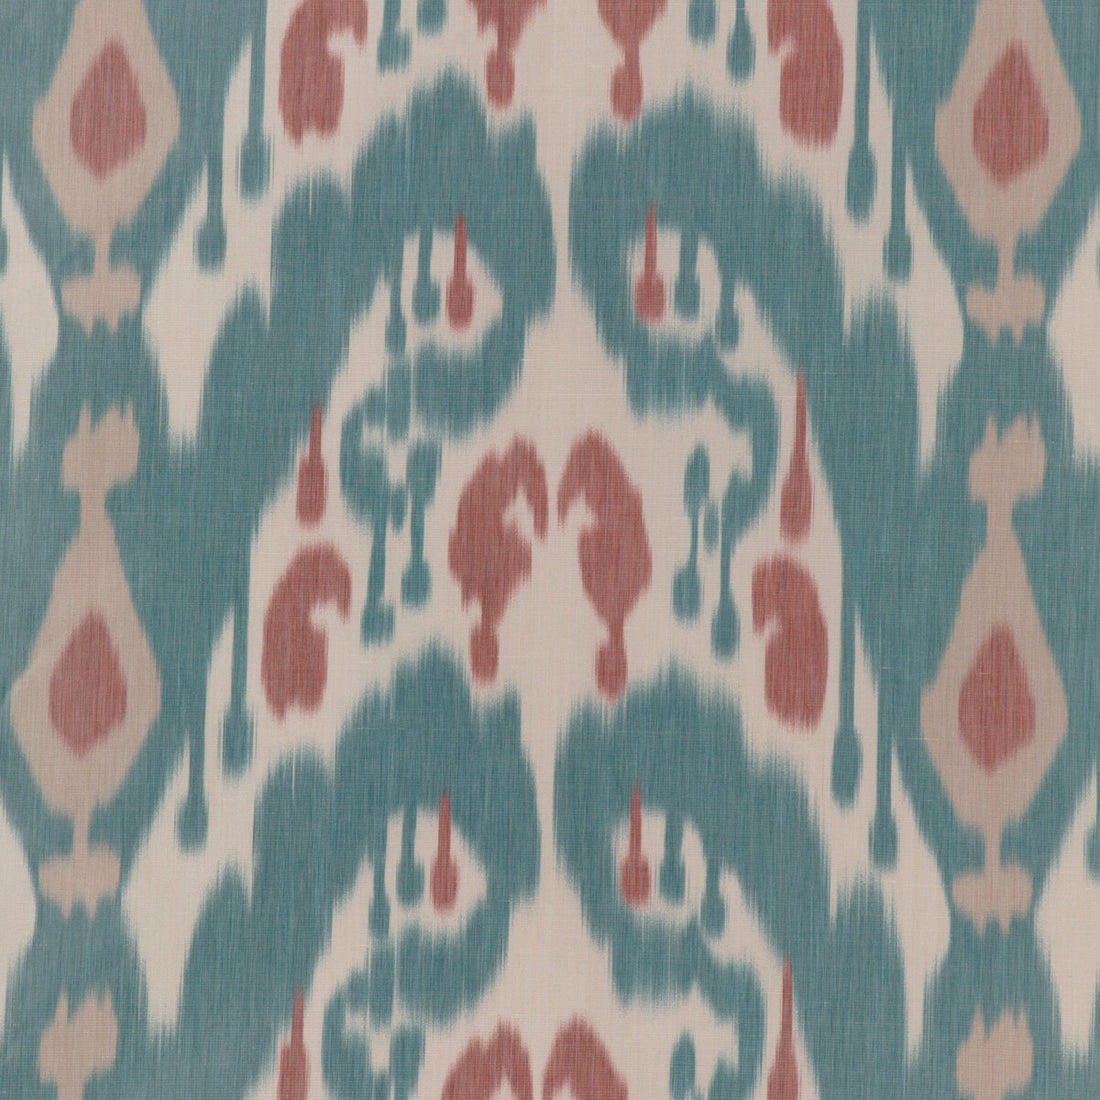 Bukara Warp Print fabric in lake color - pattern 8023146.913.0 - by Brunschwig &amp; Fils in the Vienne Silks collection